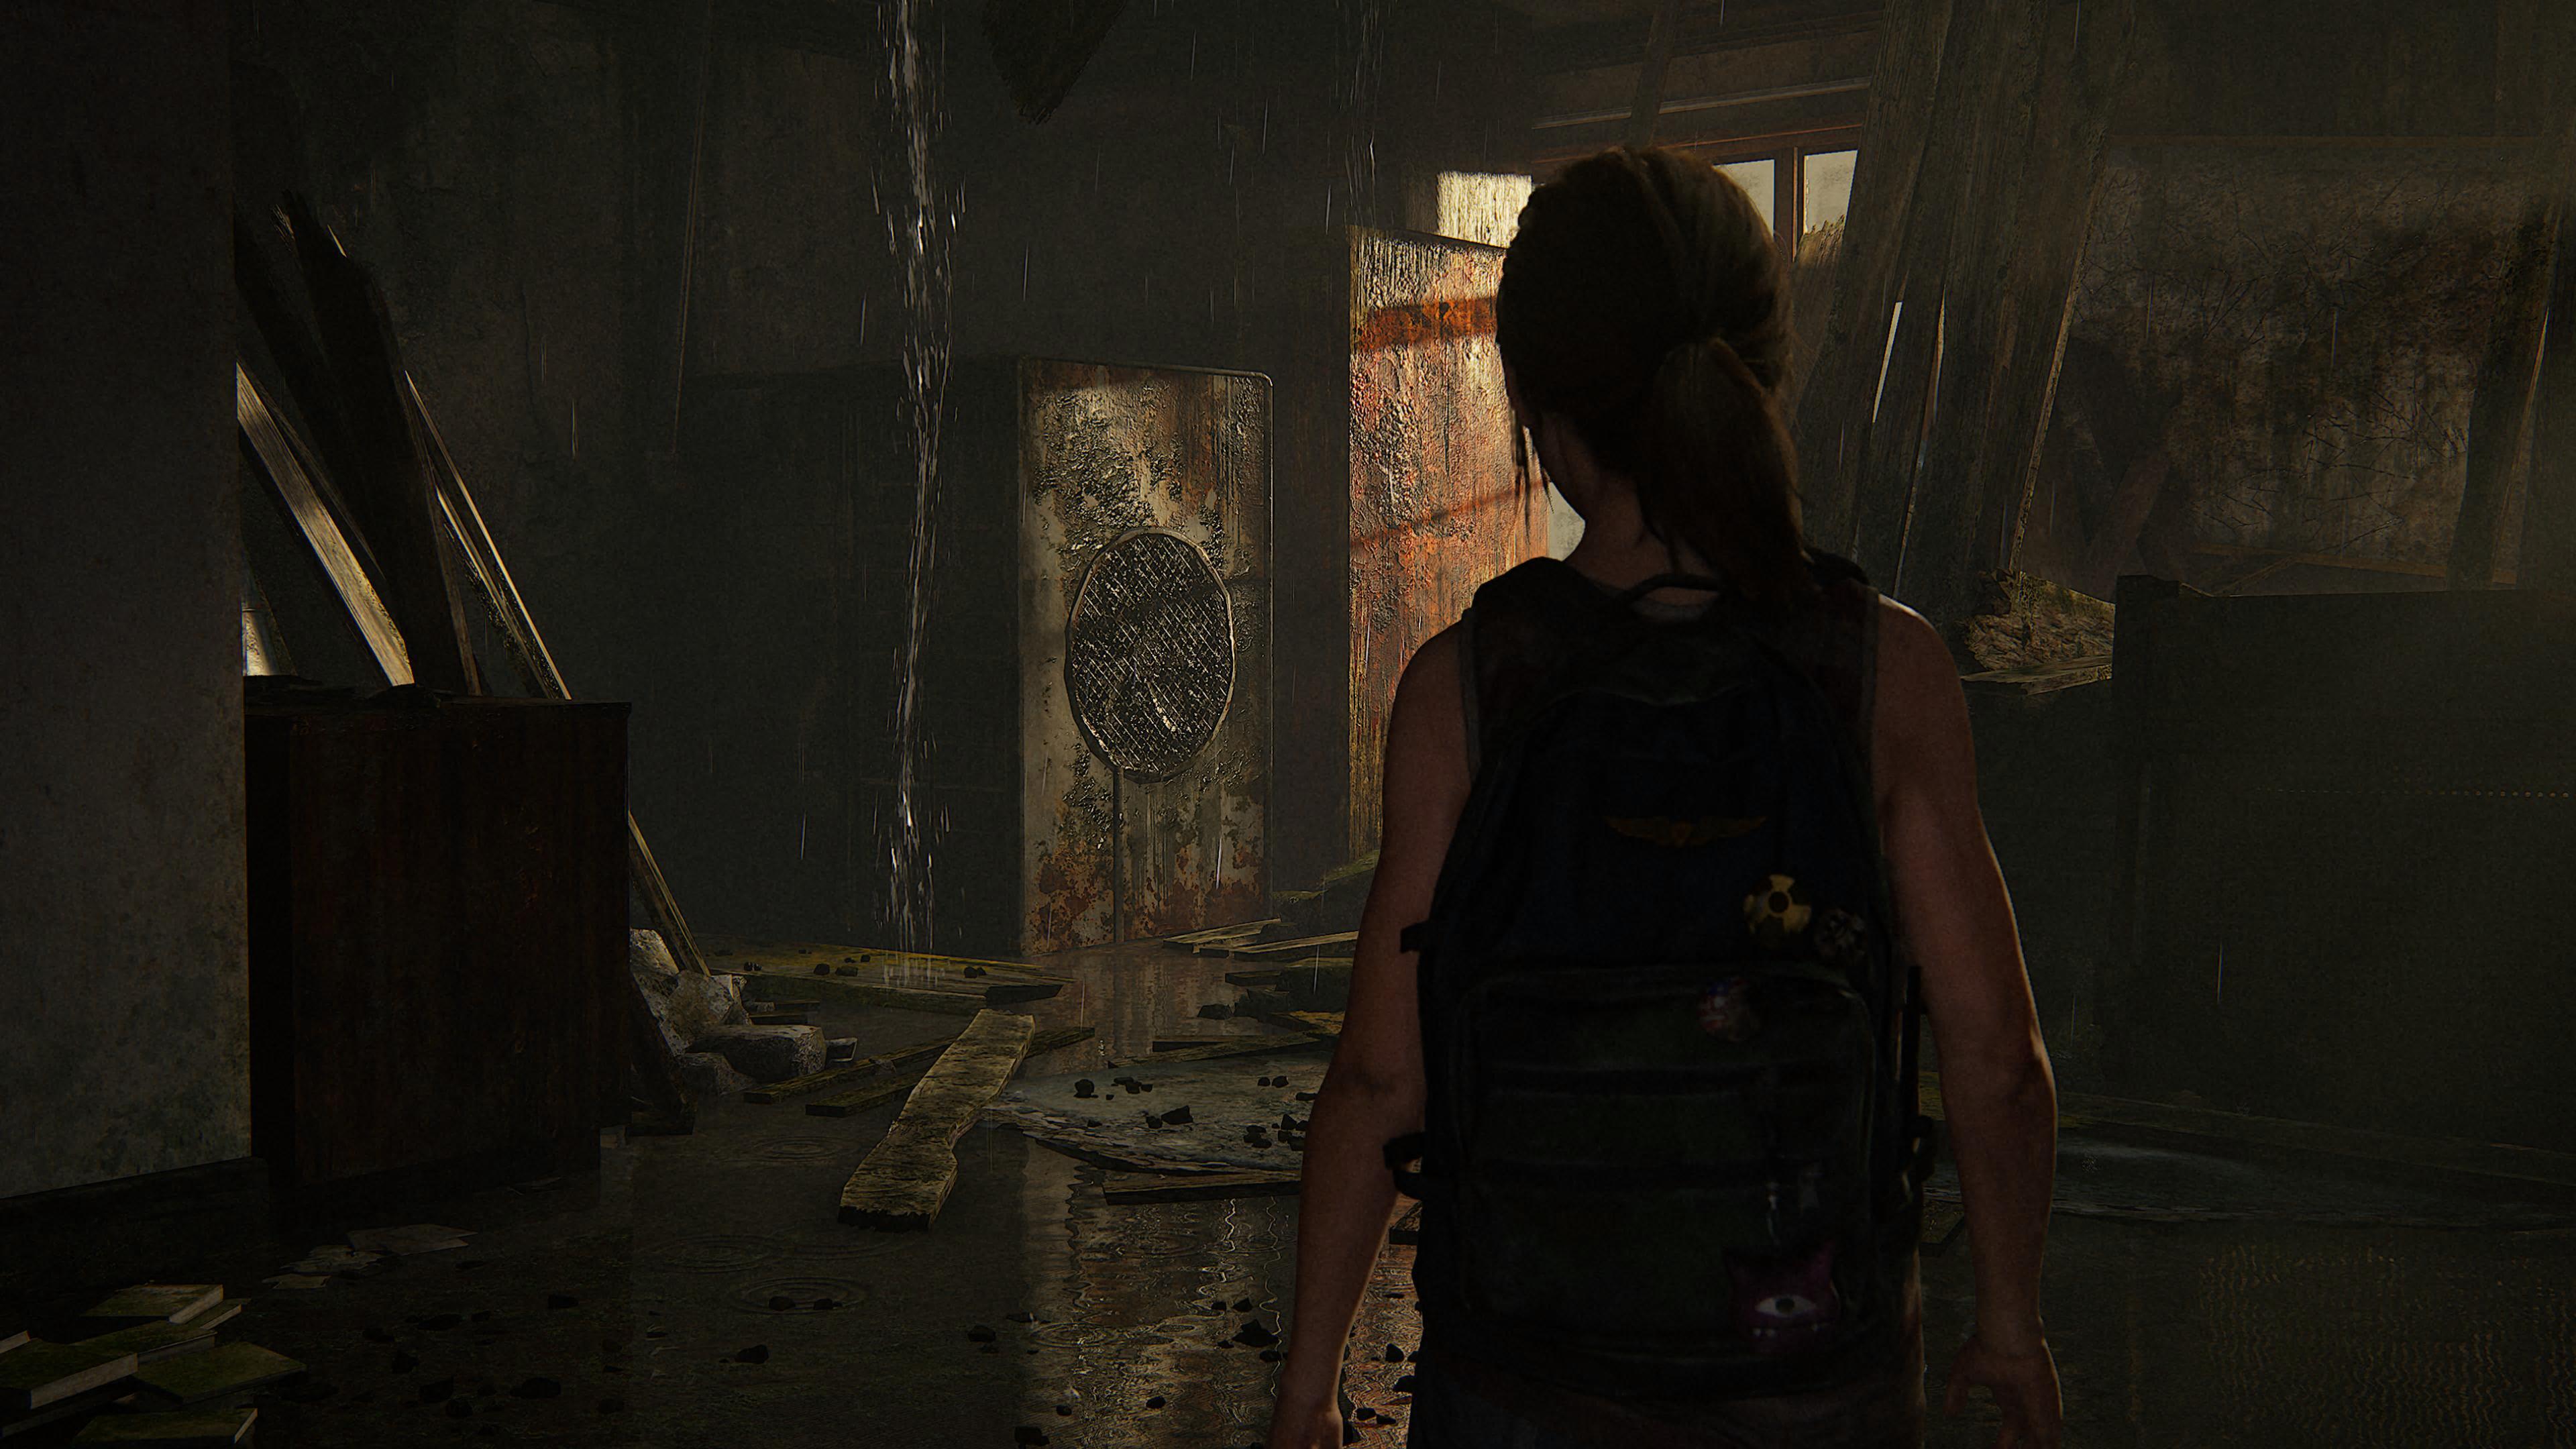 What Exactly Is the Point of 'The Last of Us'? - ArtReview